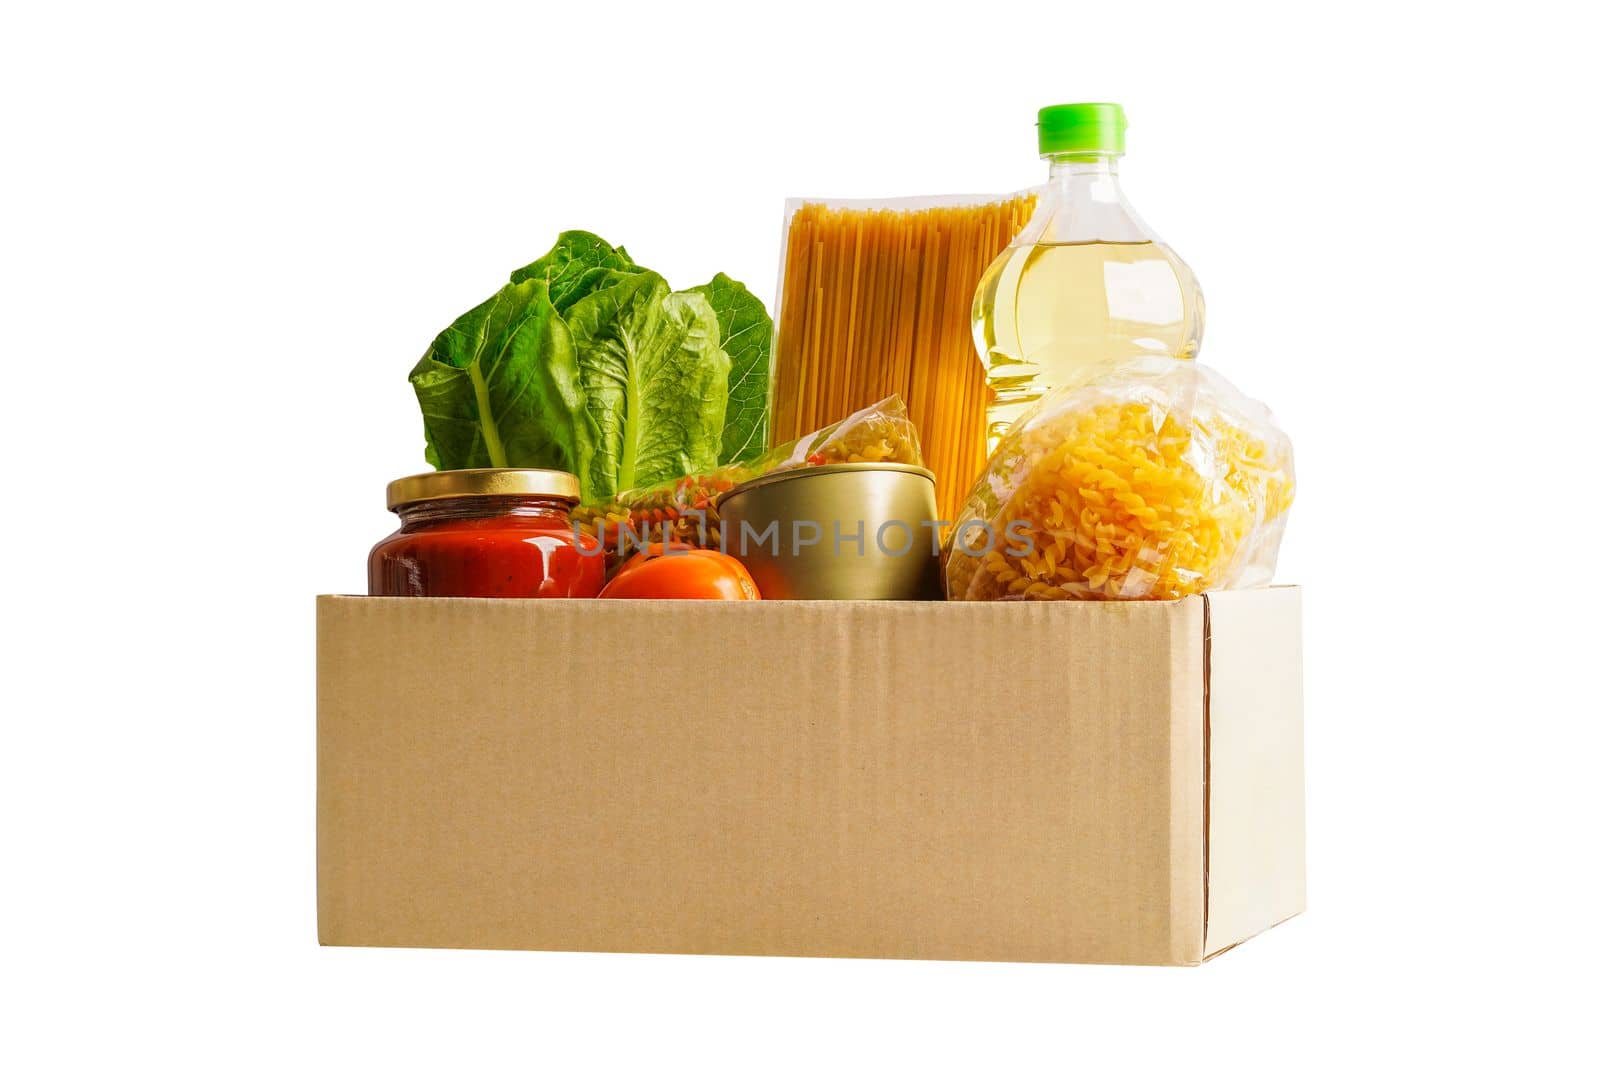 Foodstuffs in donation box isolated on white background with clipping path for volunteer to help people. by sweettomato